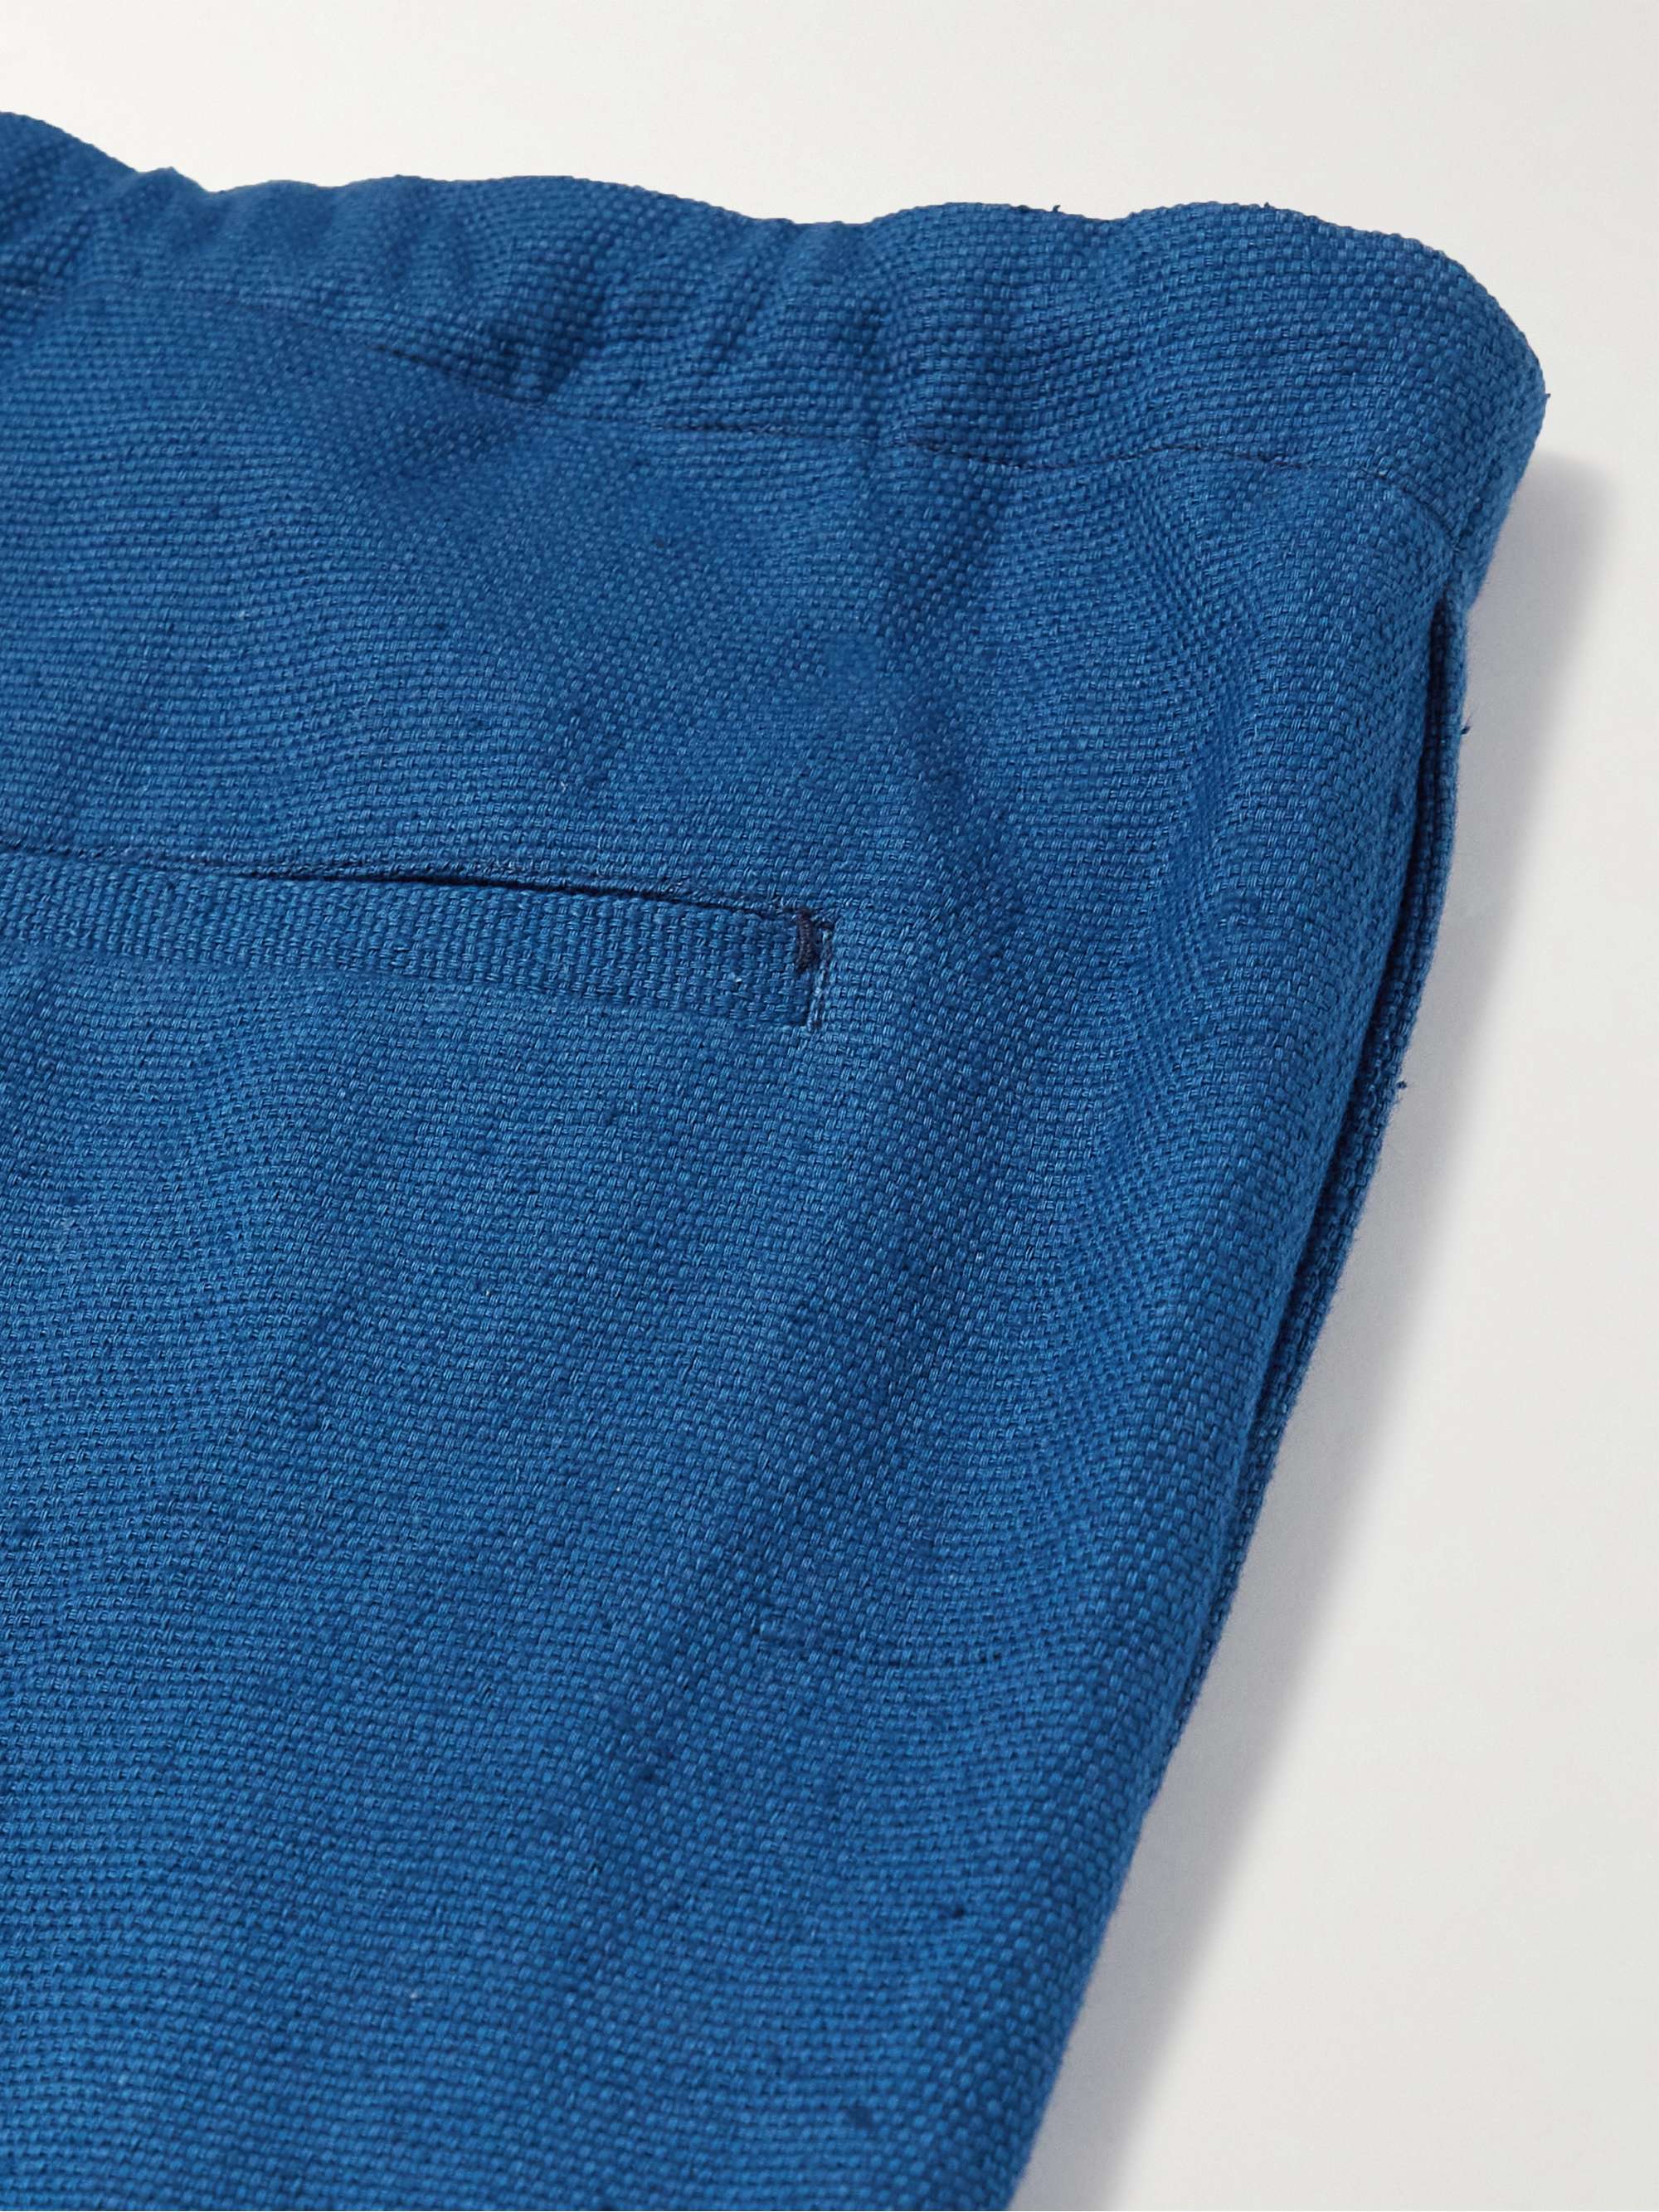 11.11/ELEVEN ELEVEN Tapered Indigo-Dyed Organic Cotton Drawstring Trousers